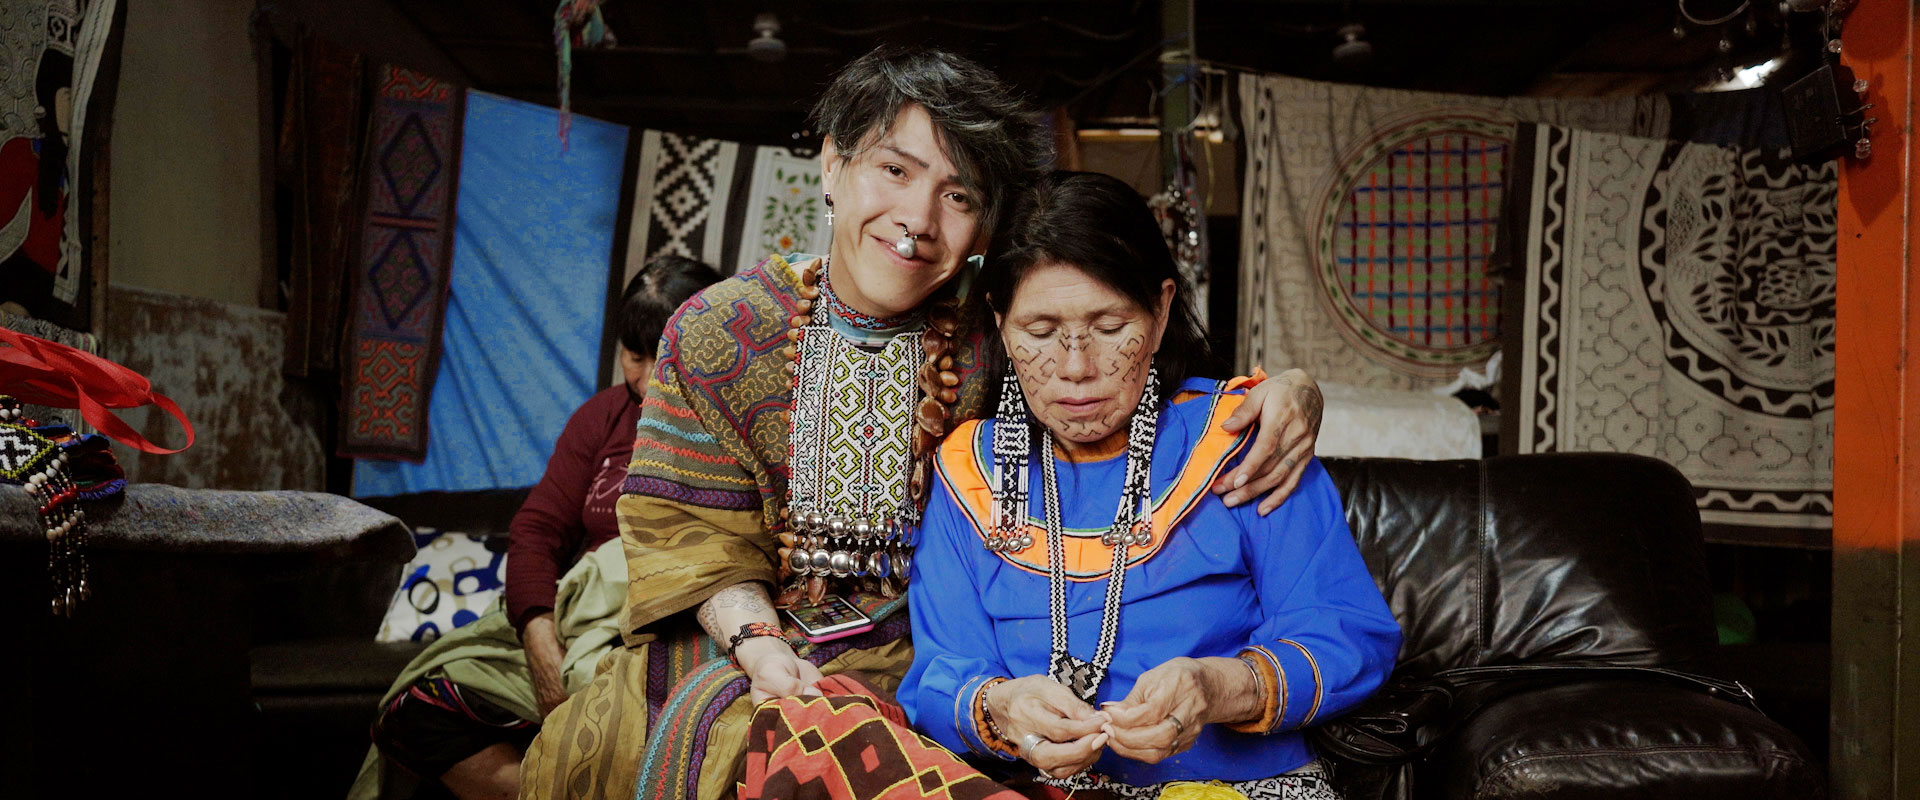 Young man with peircing with arm around woman sewing, both in traditional dress